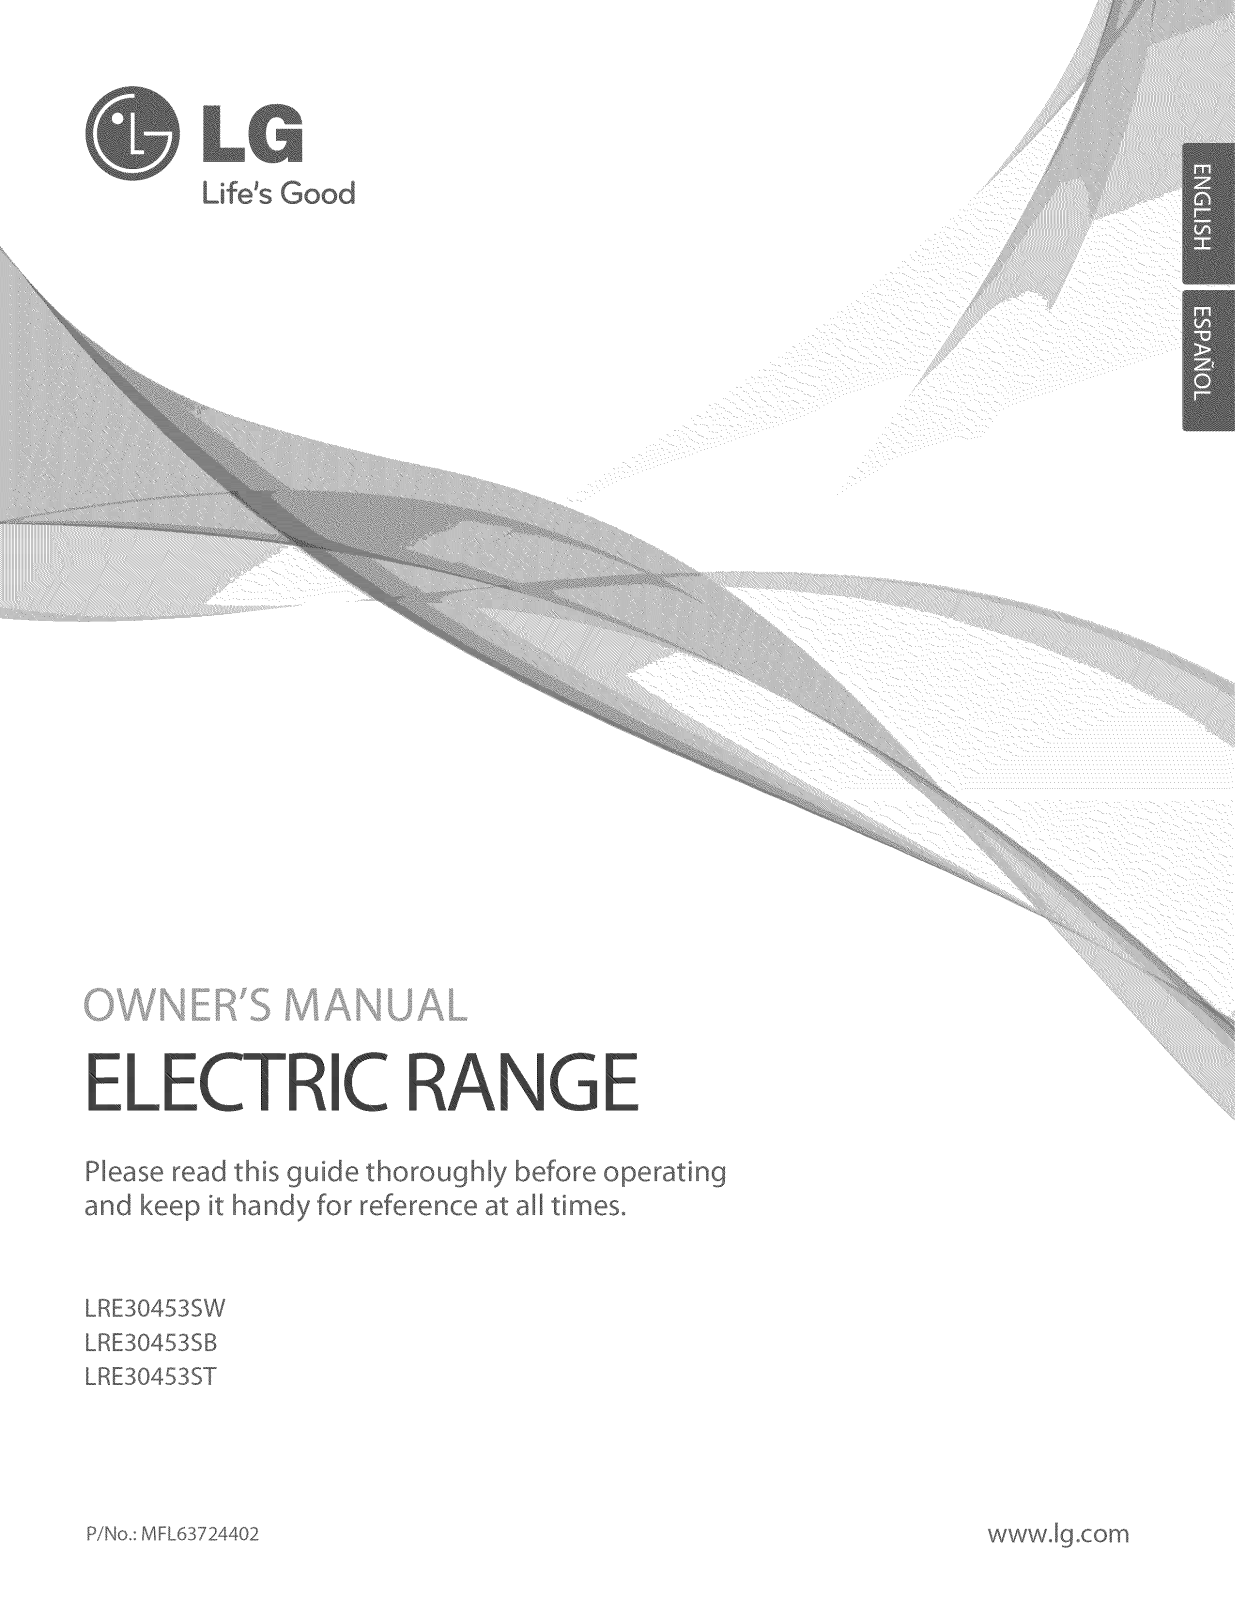 LG LRE30453ST/01 Owner’s Manual